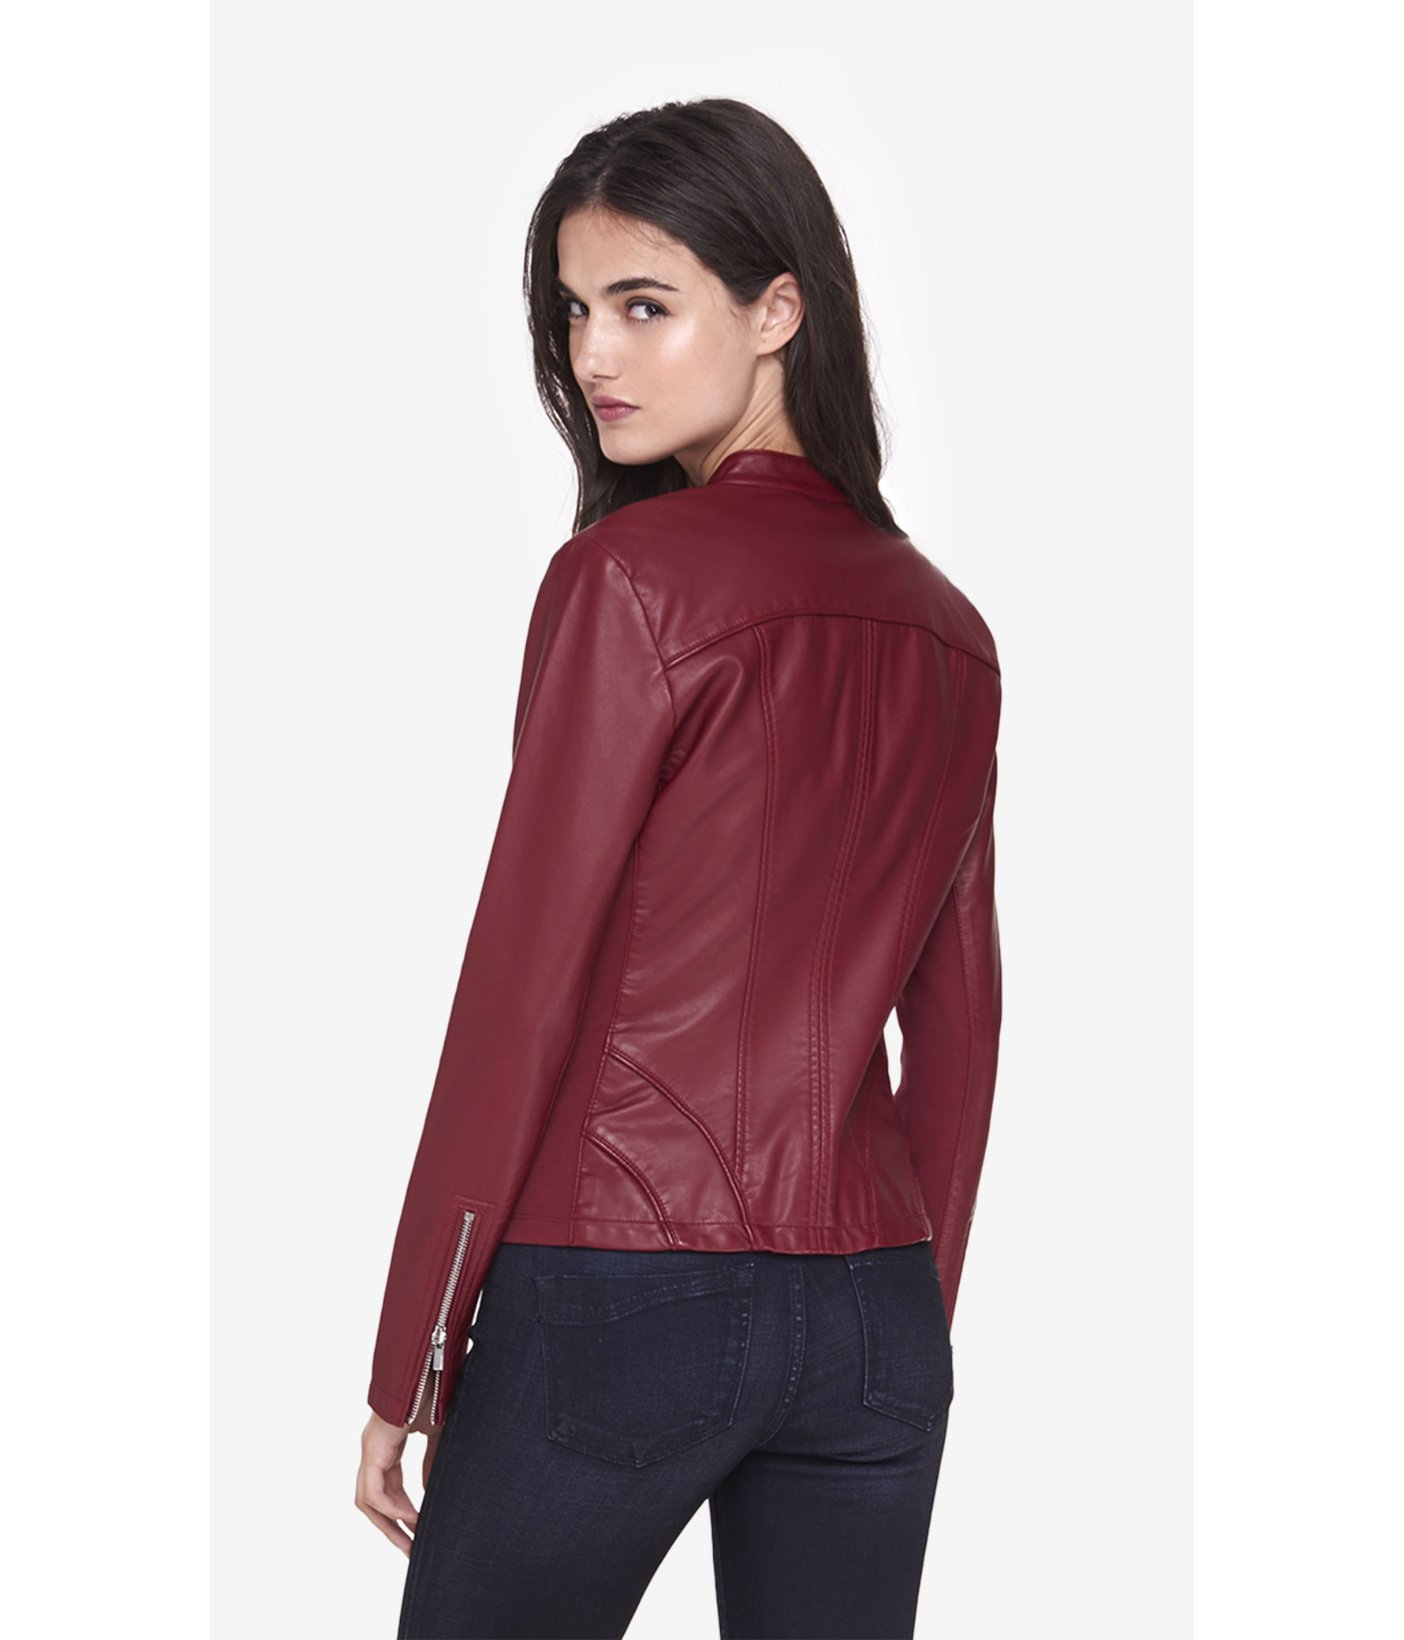 Lyst Express Seamed Moto (minus The) Leather Jacket in Red